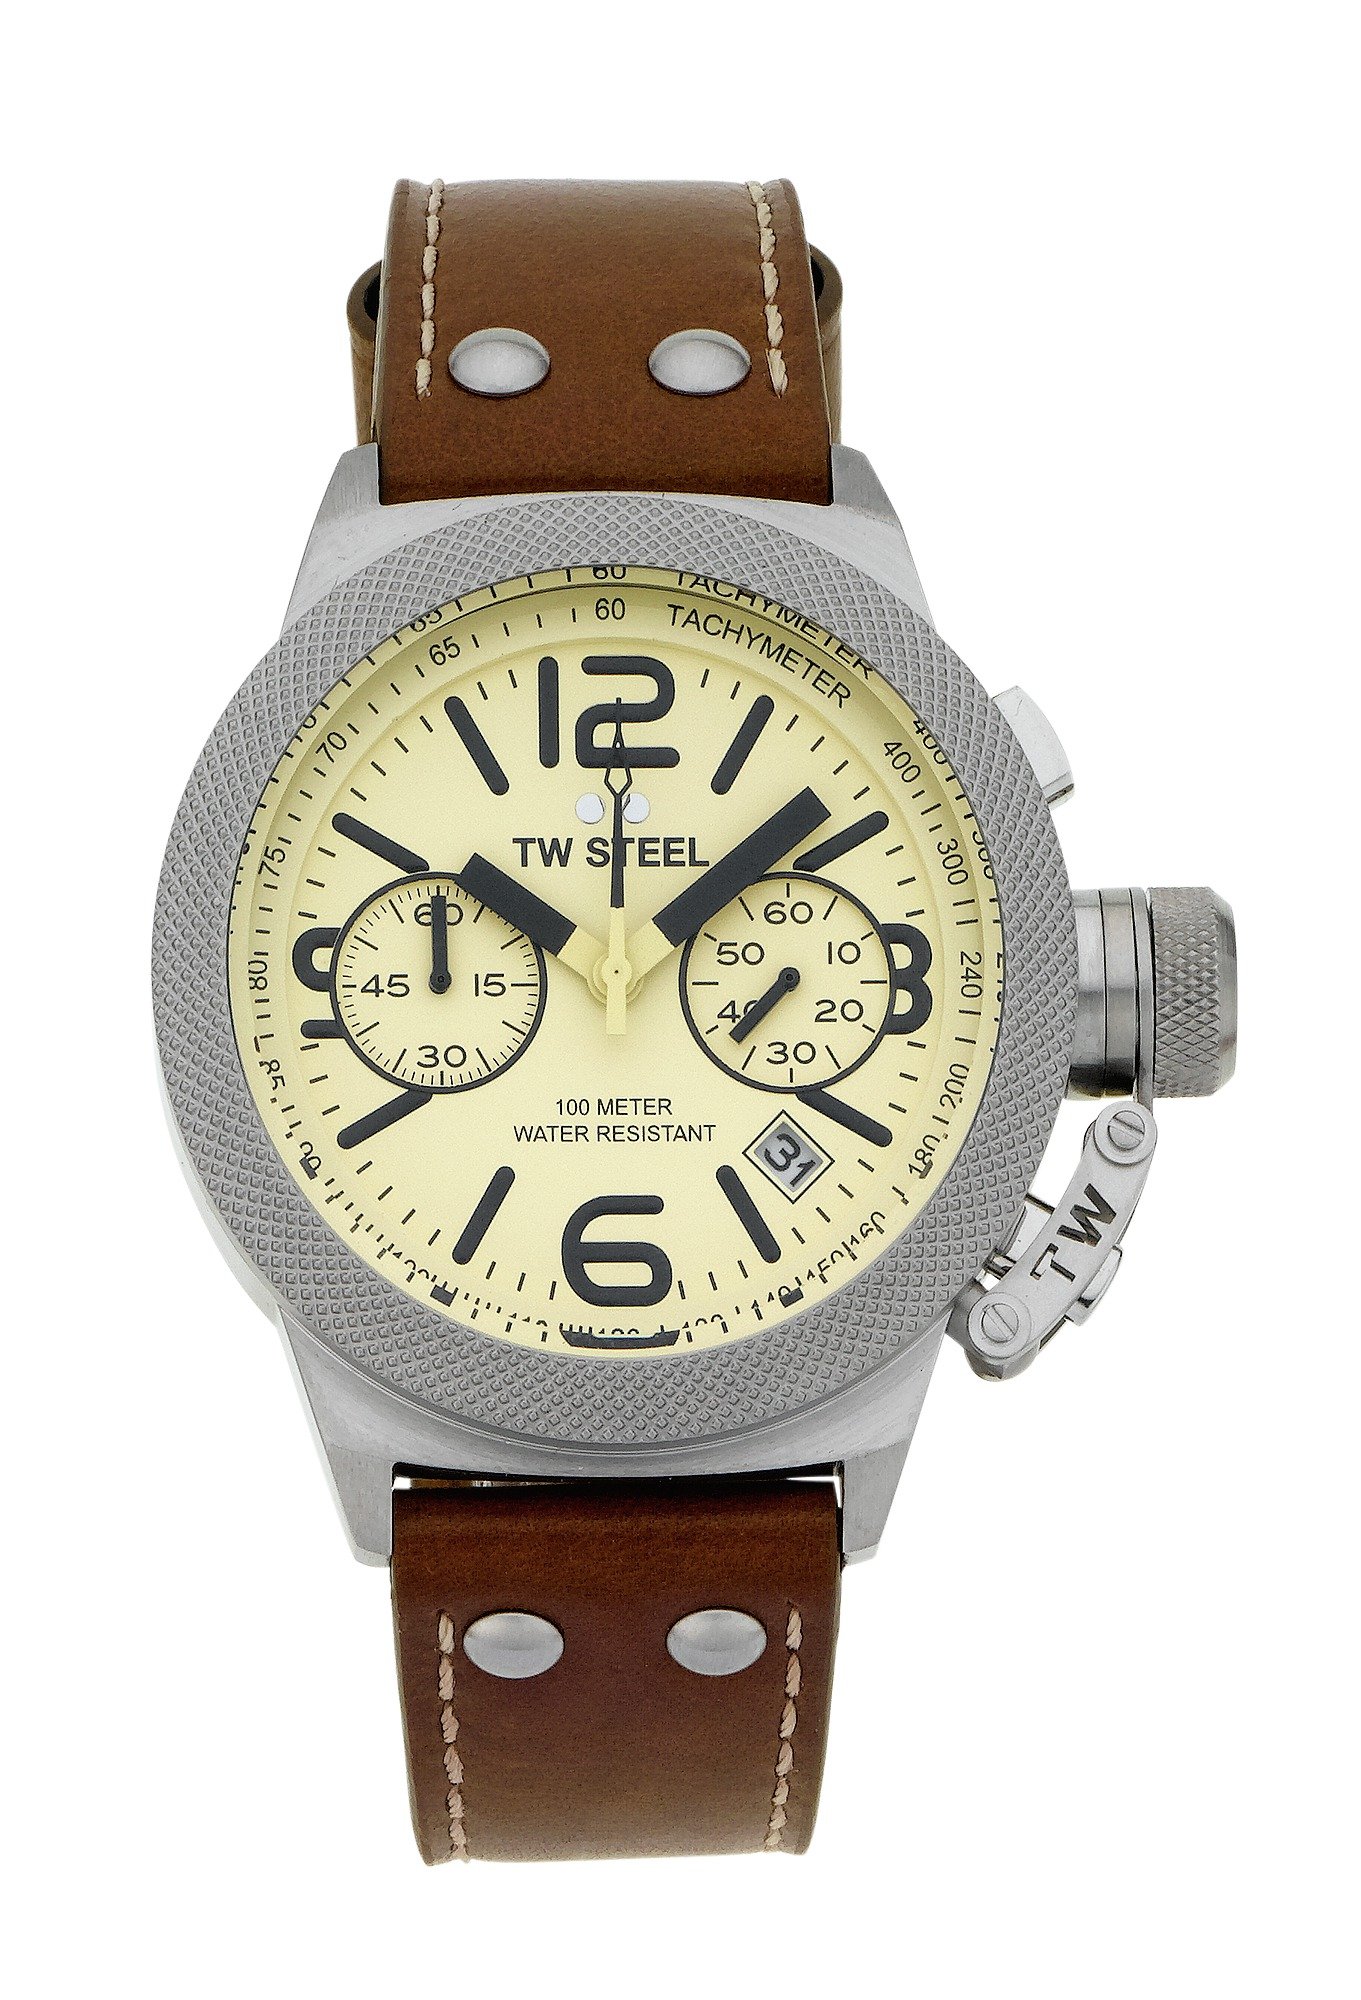 TW Steel Men's Canteen TWCS13 Chronograph Strap Watch